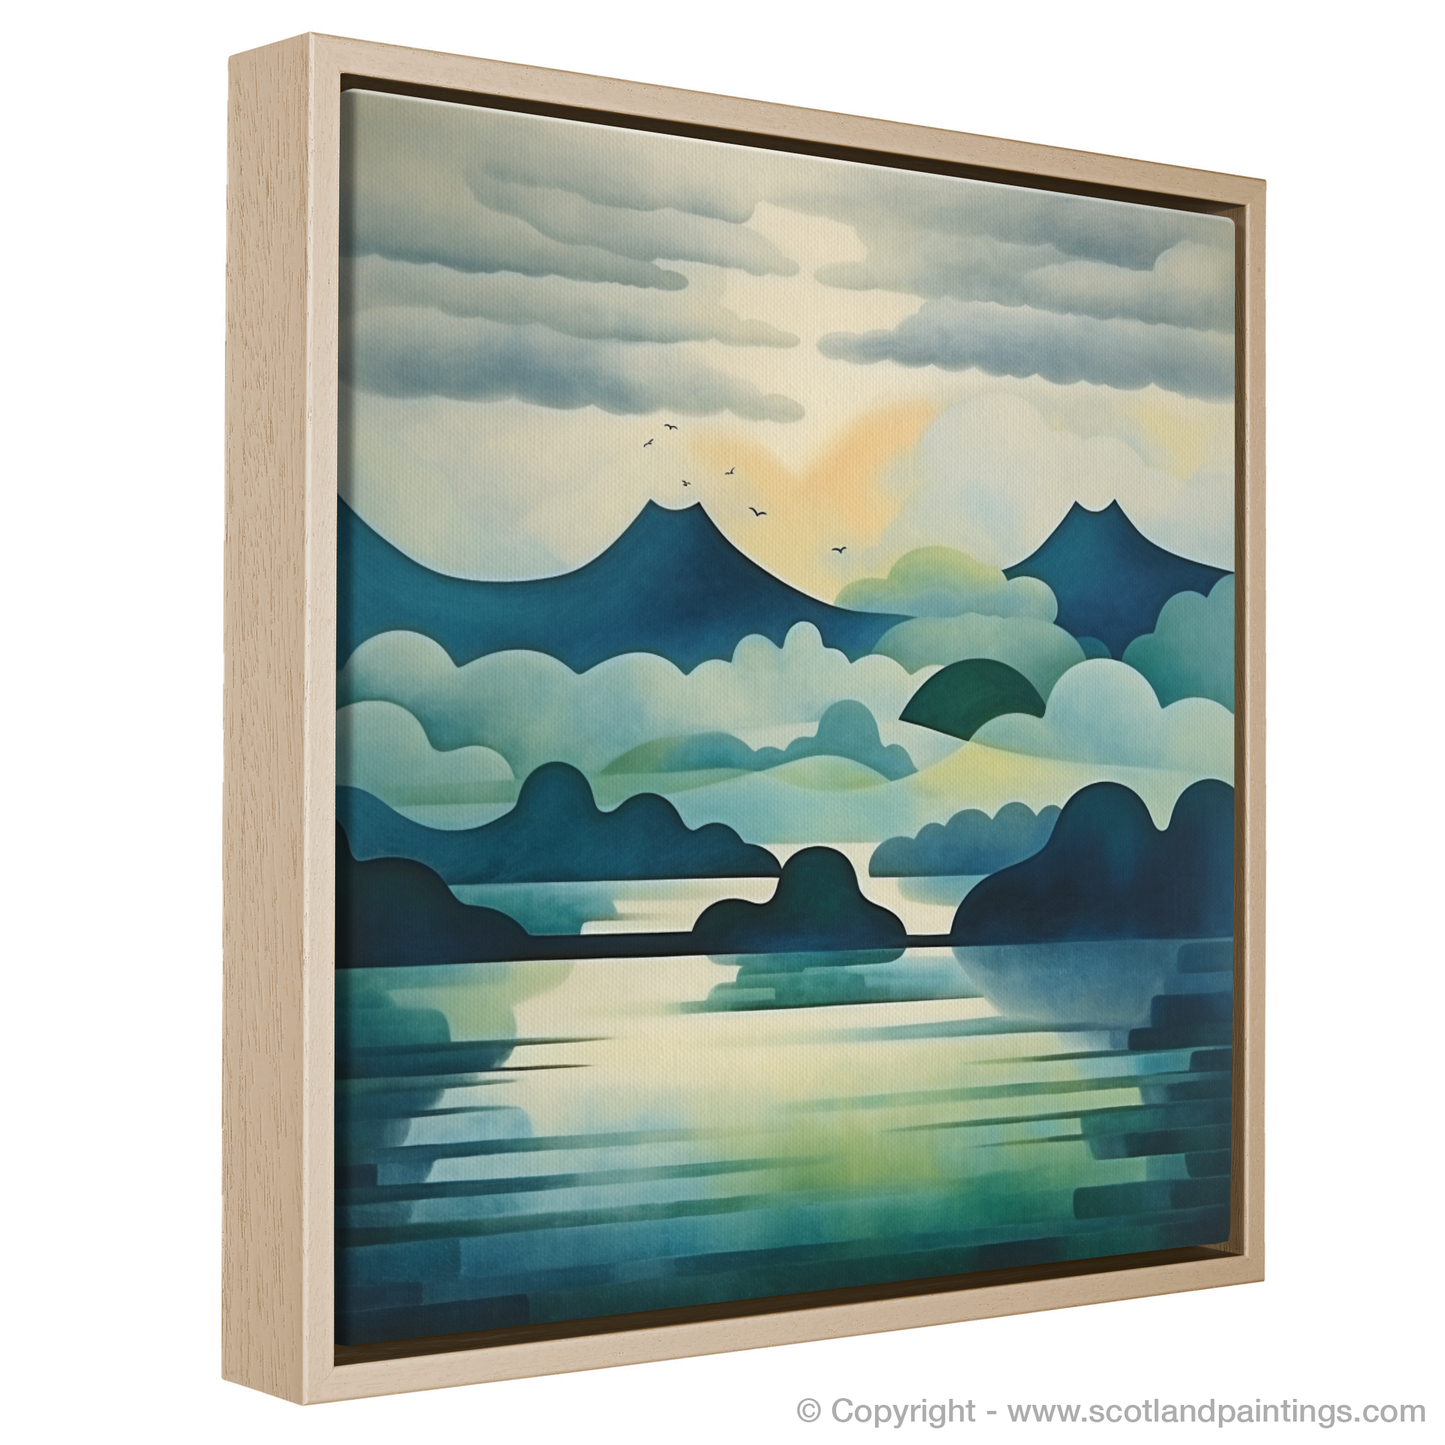 Painting and Art Print of Misty morning on Loch Lomond entitled "Misty Morning Majesty: An Abstract Ode to Loch Lomond".